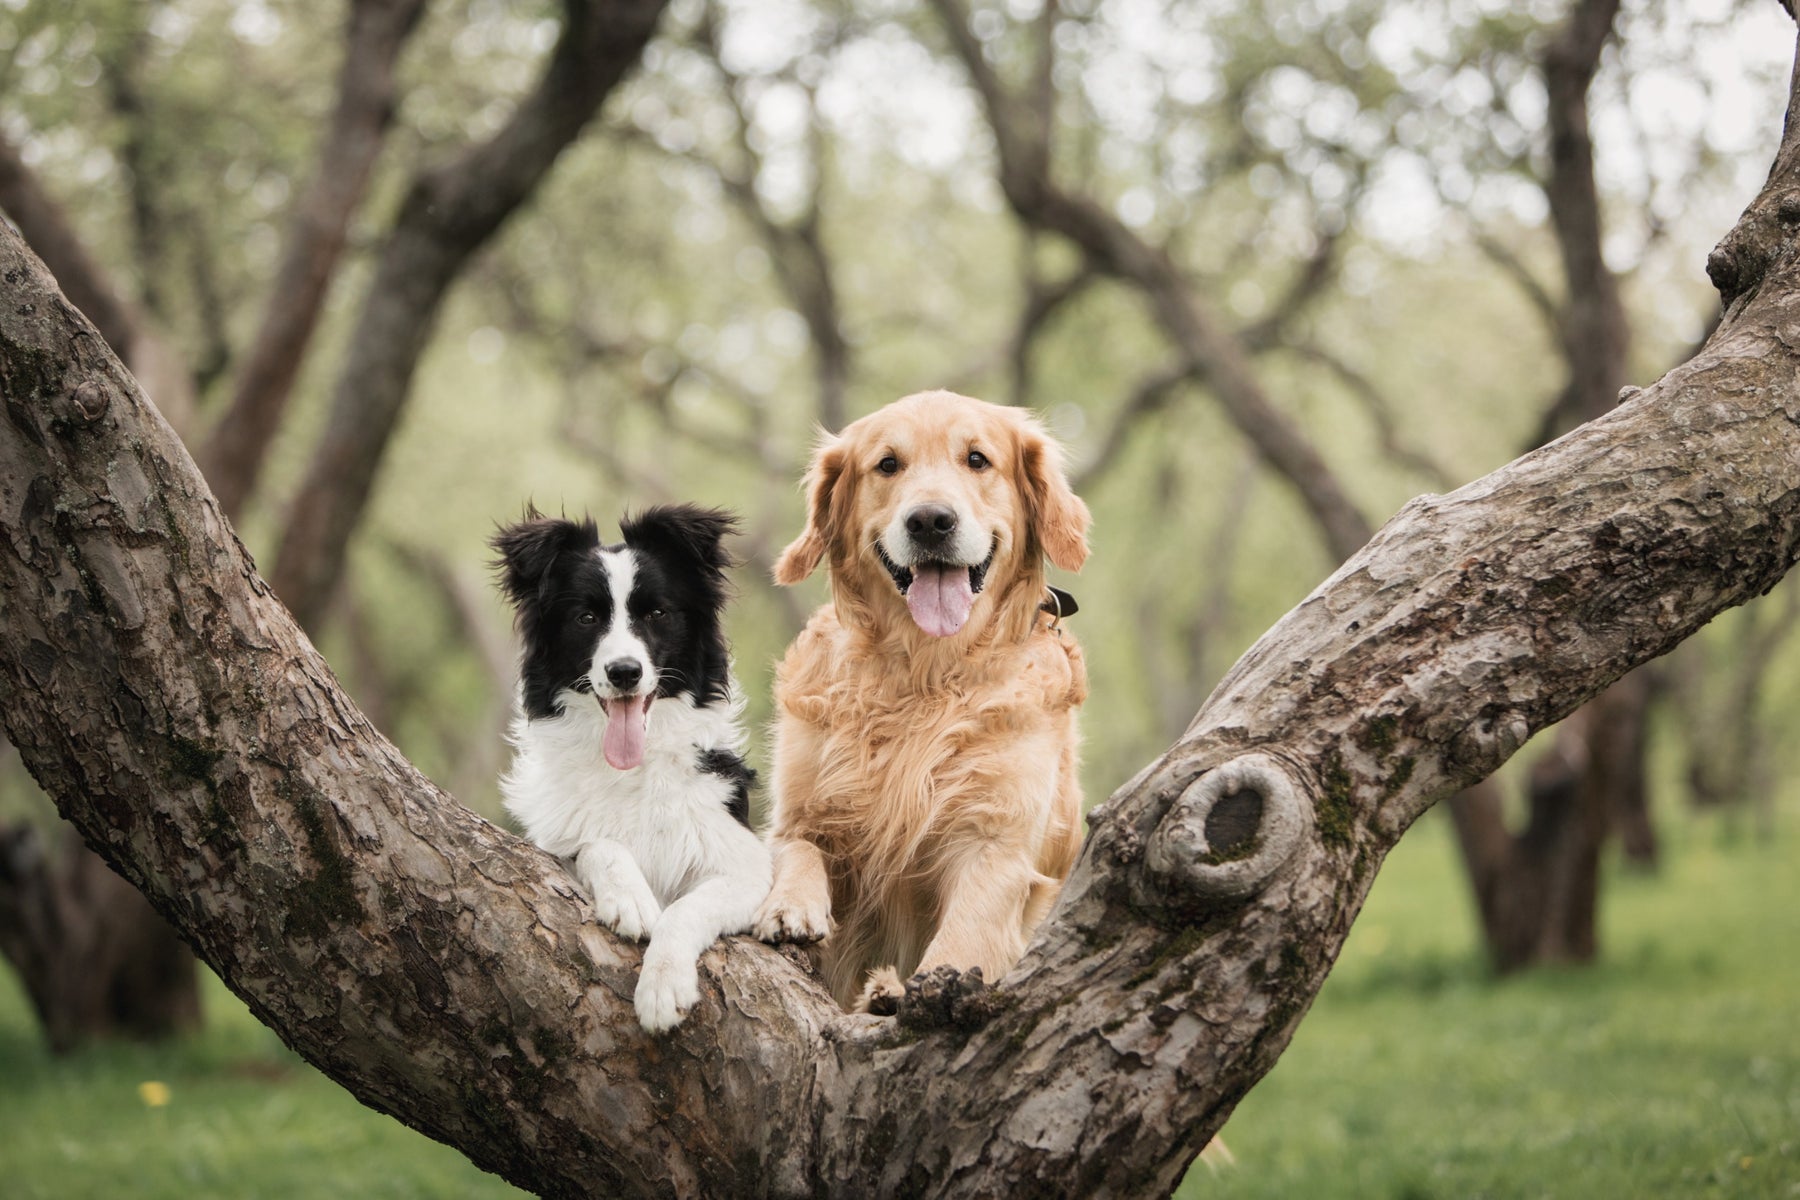 Benadryl For Dogs: Safe Dosages And Uses